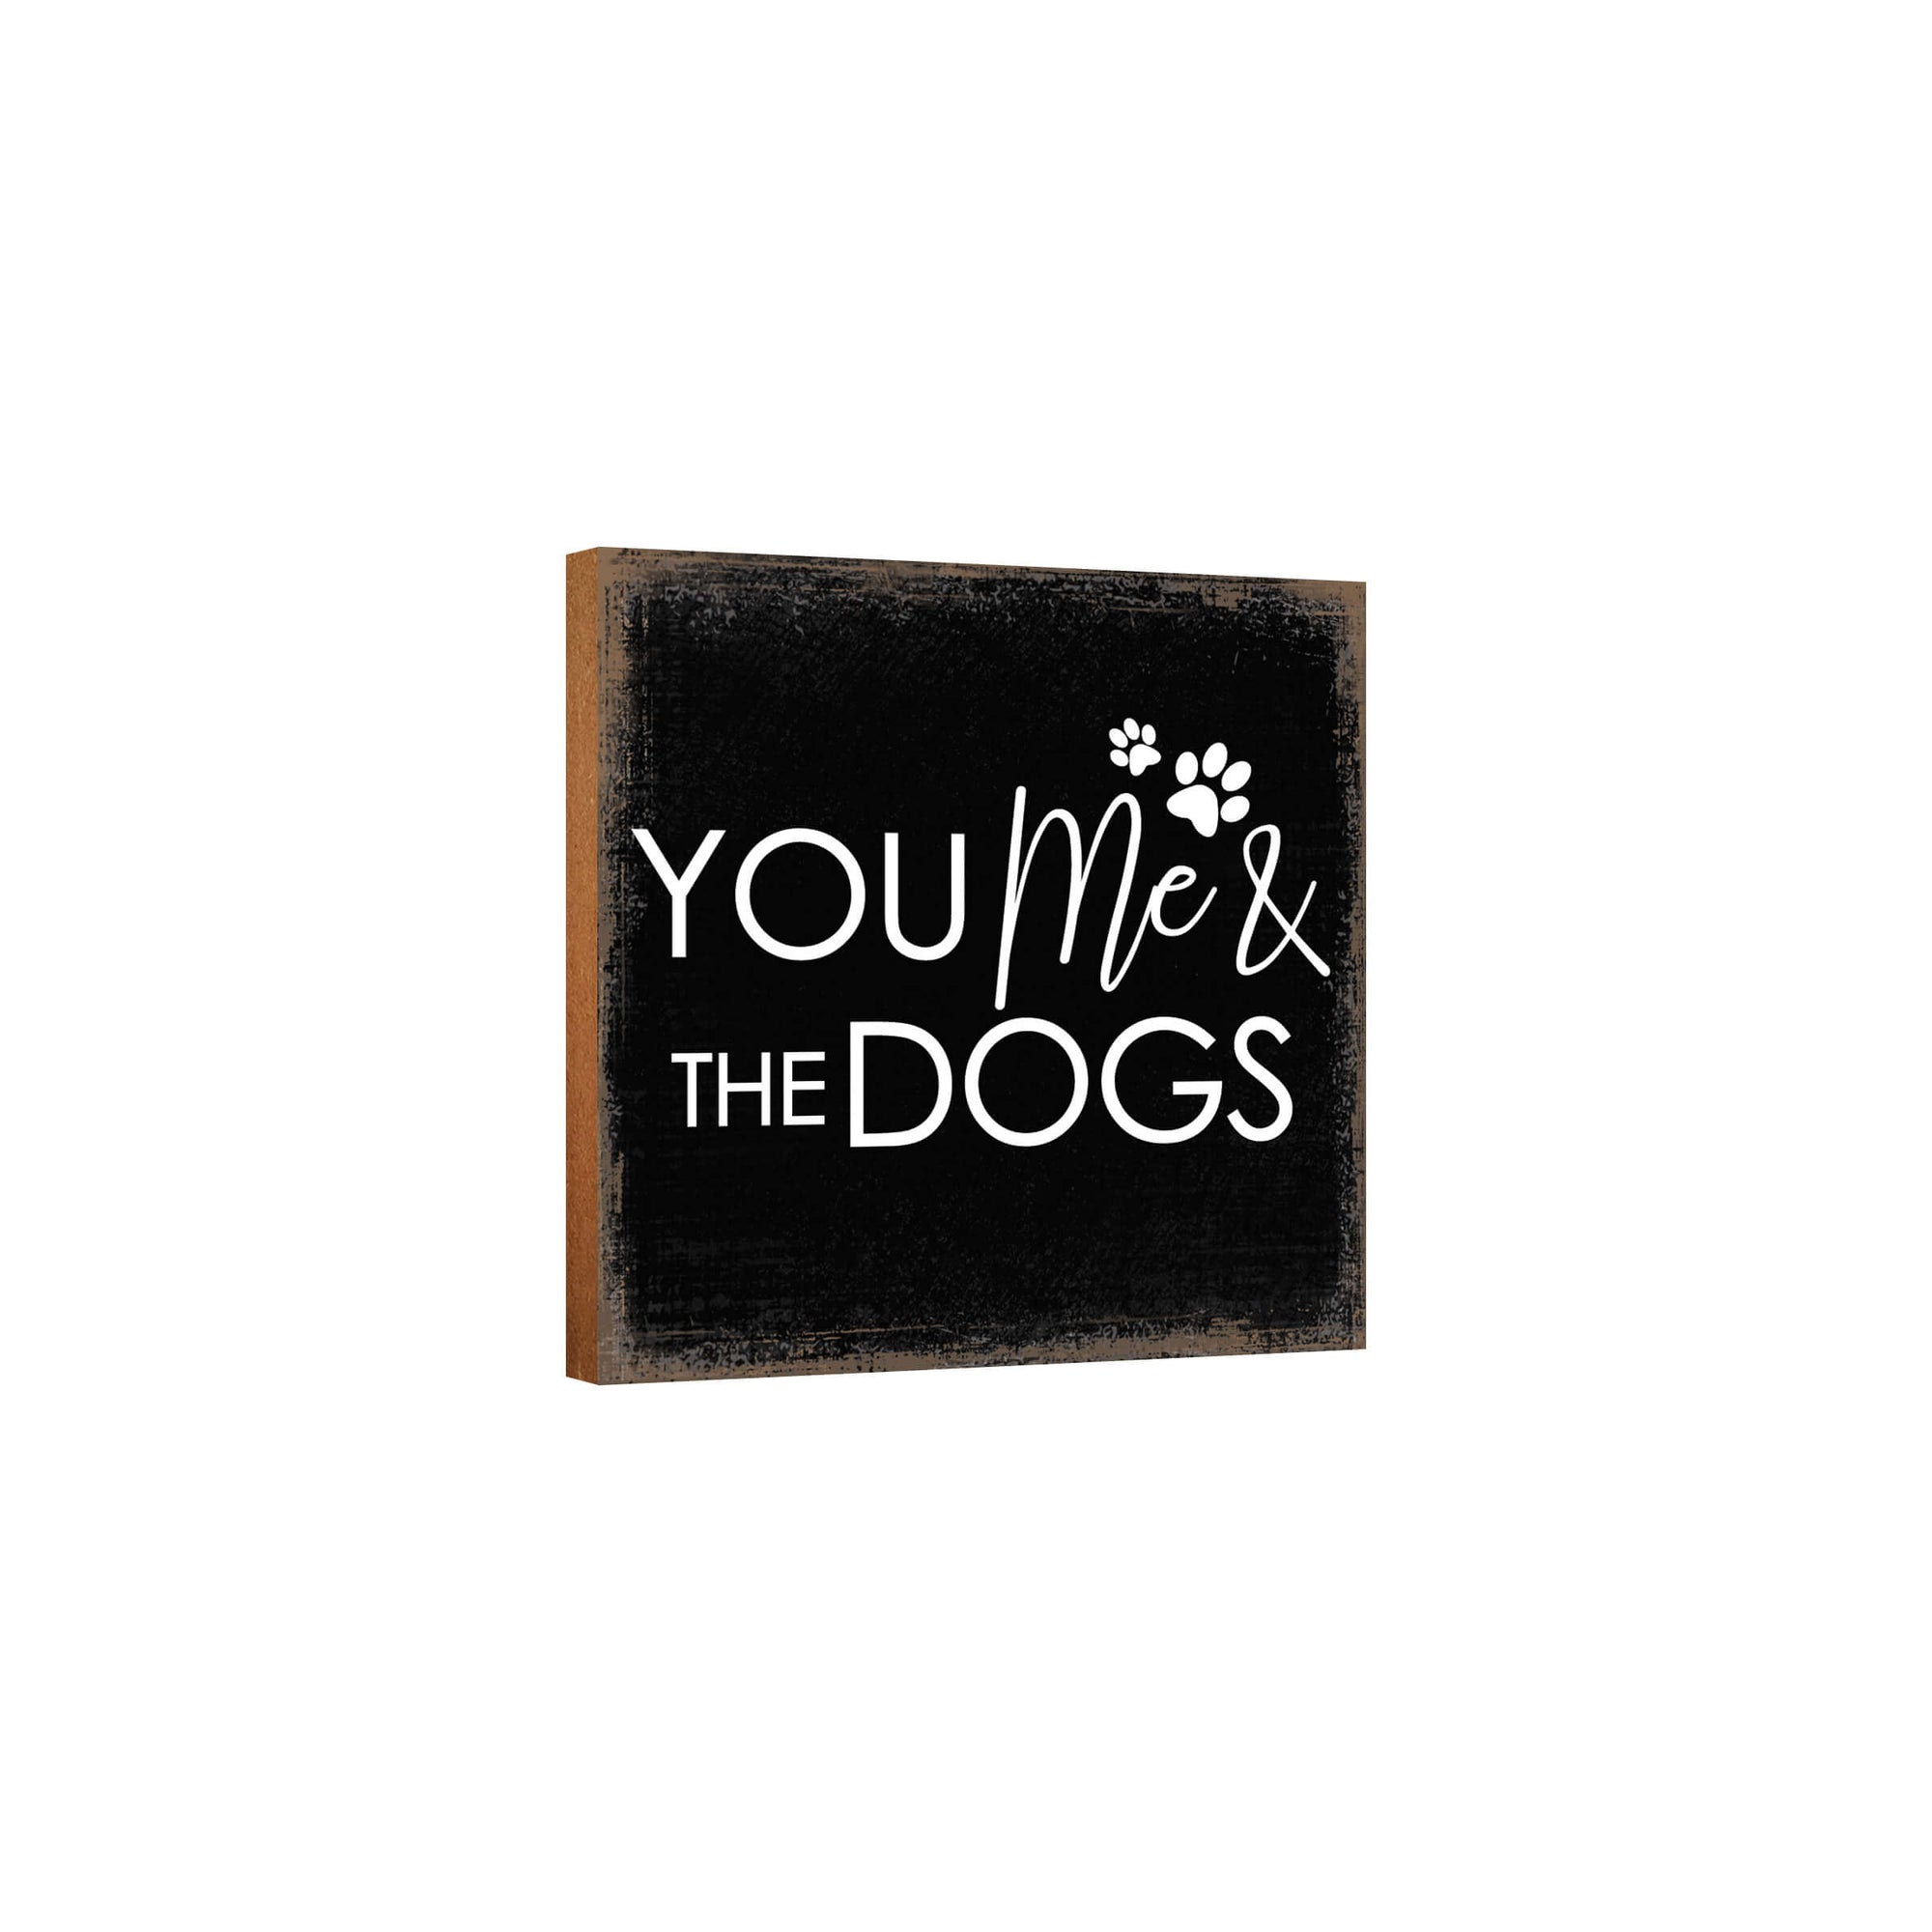 Wooden Shelf Decor and Tabletop Signs with Pet Verses - You Me & My Dogs